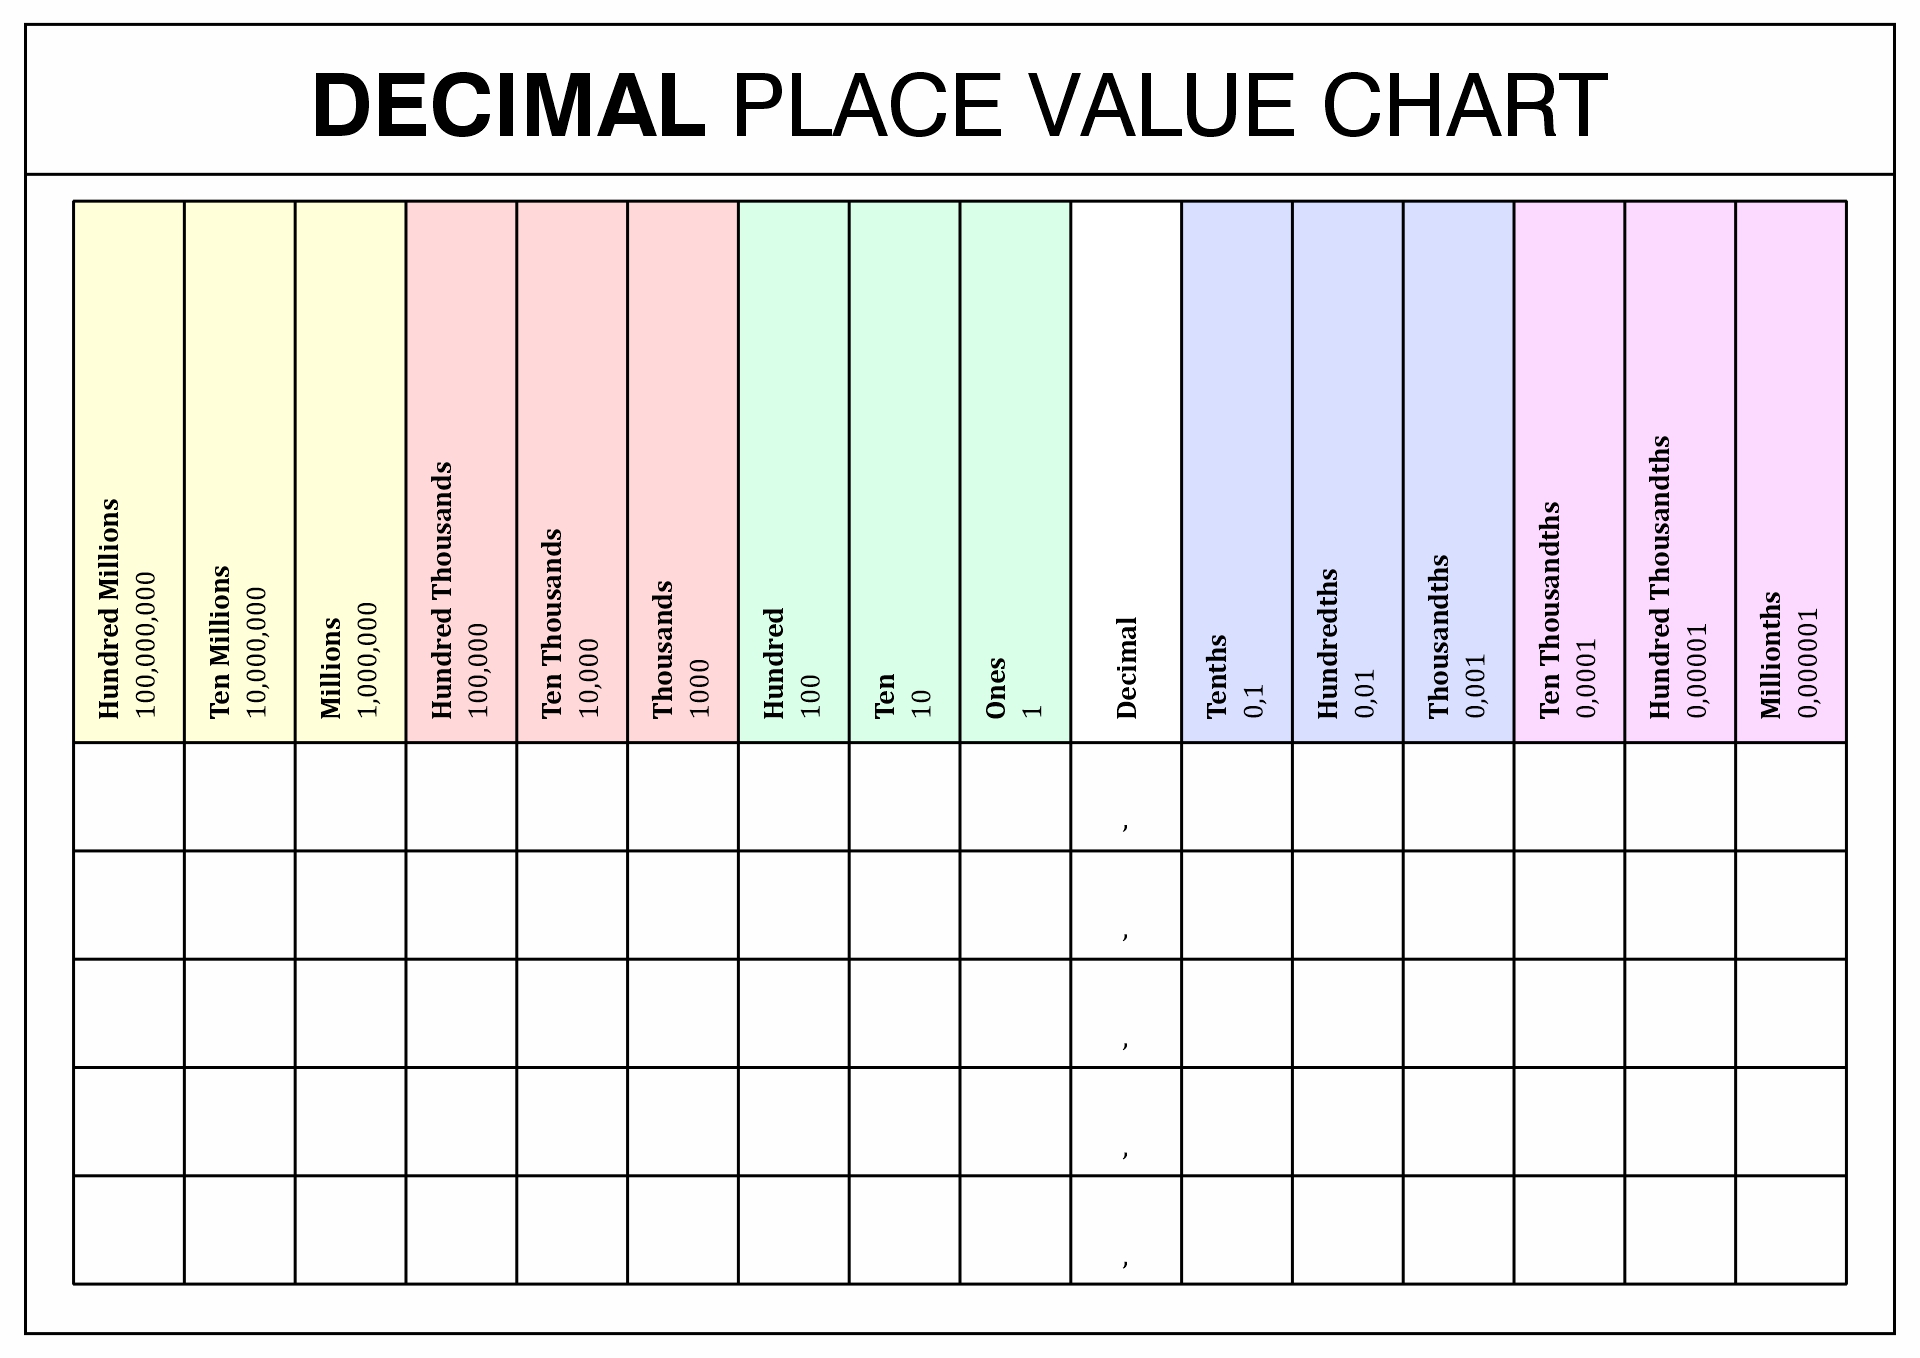 Blank Decimal Place Value Chart Image